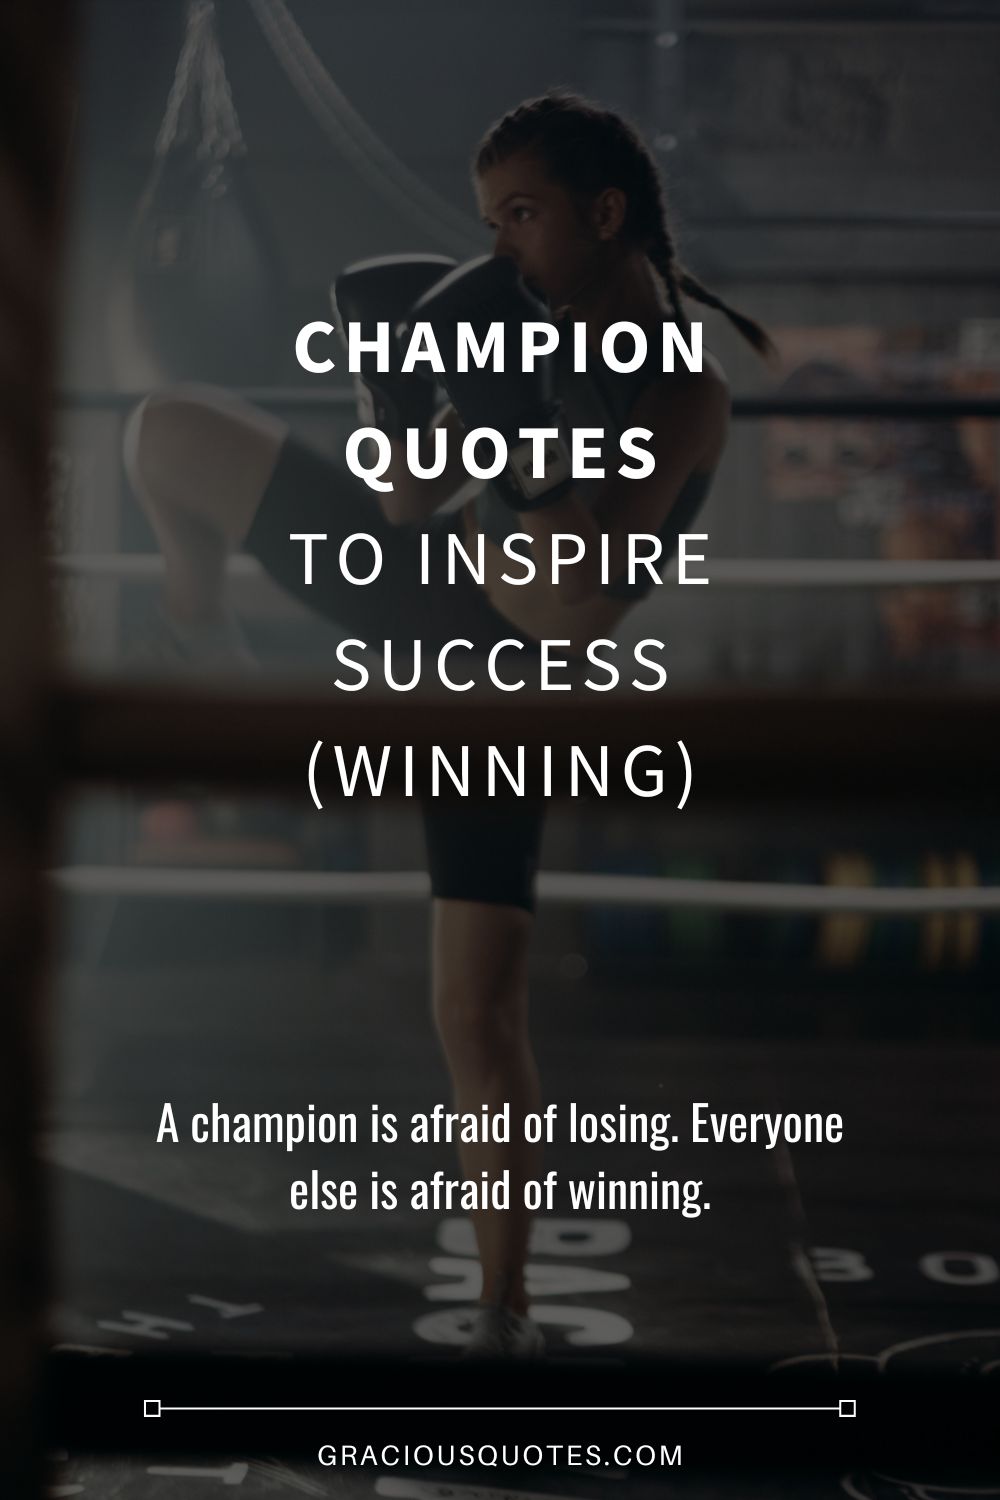 Champion Quotes to Inspire Success (WINNING) - Gracious Quotes